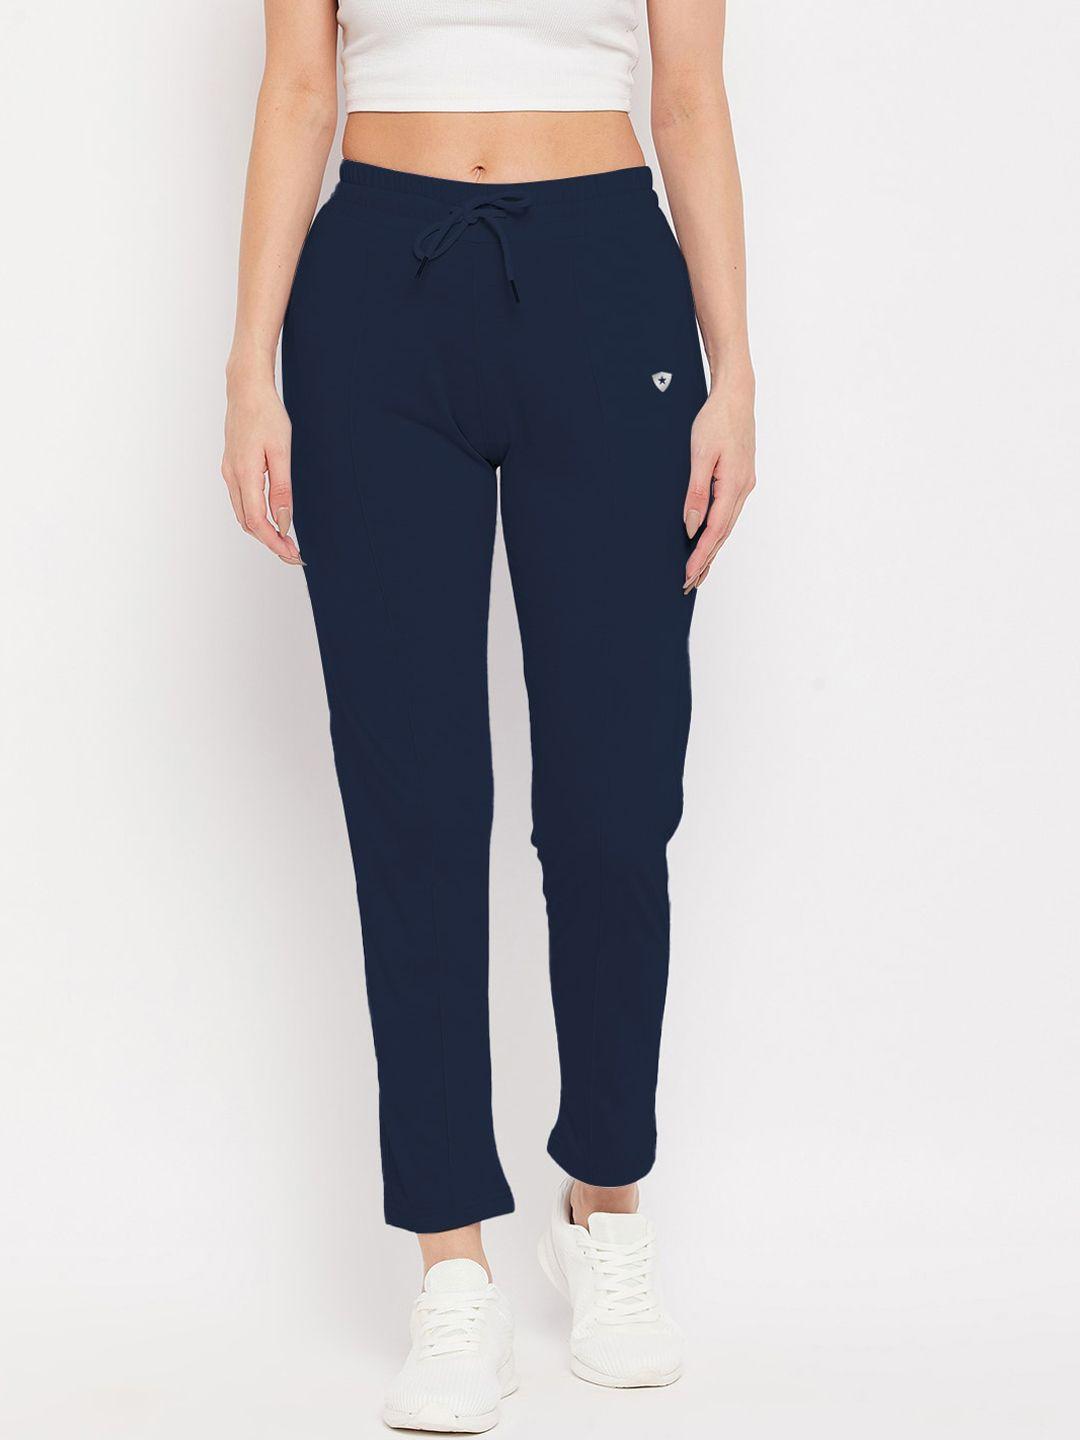 french flexious women navy blue solid track pants